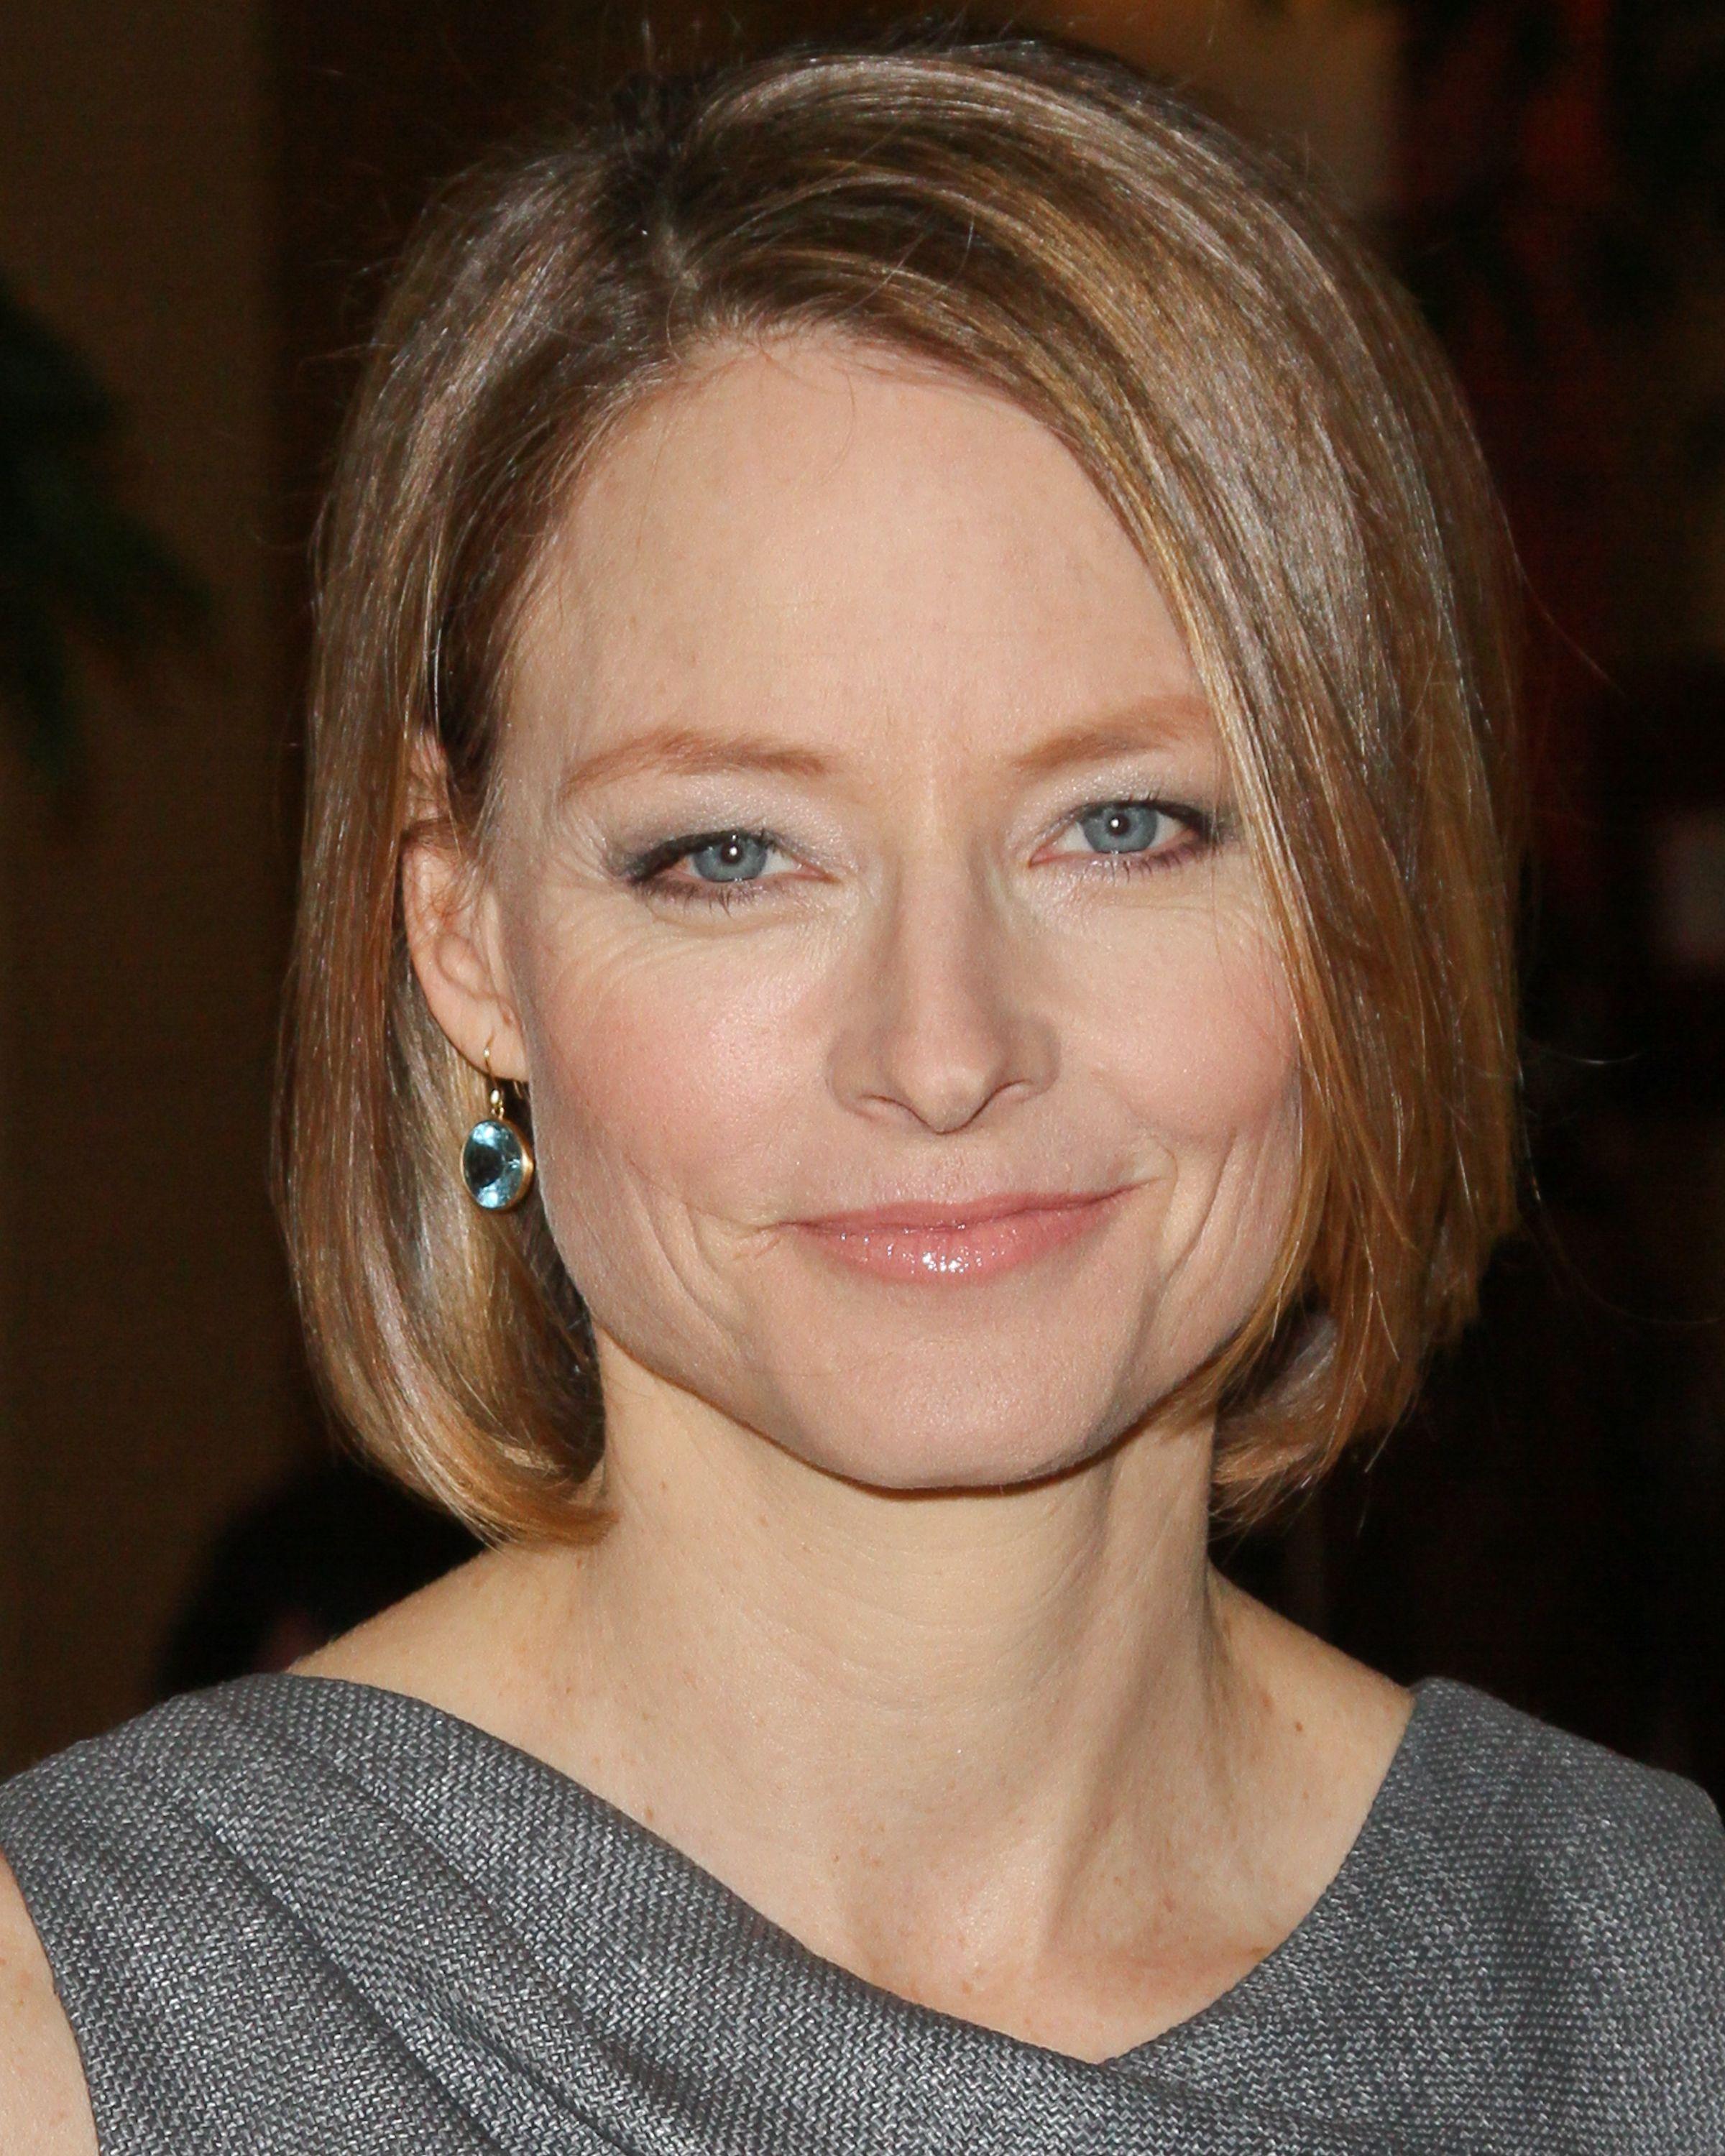 Gallery For > Jodie Foster Wallpaper